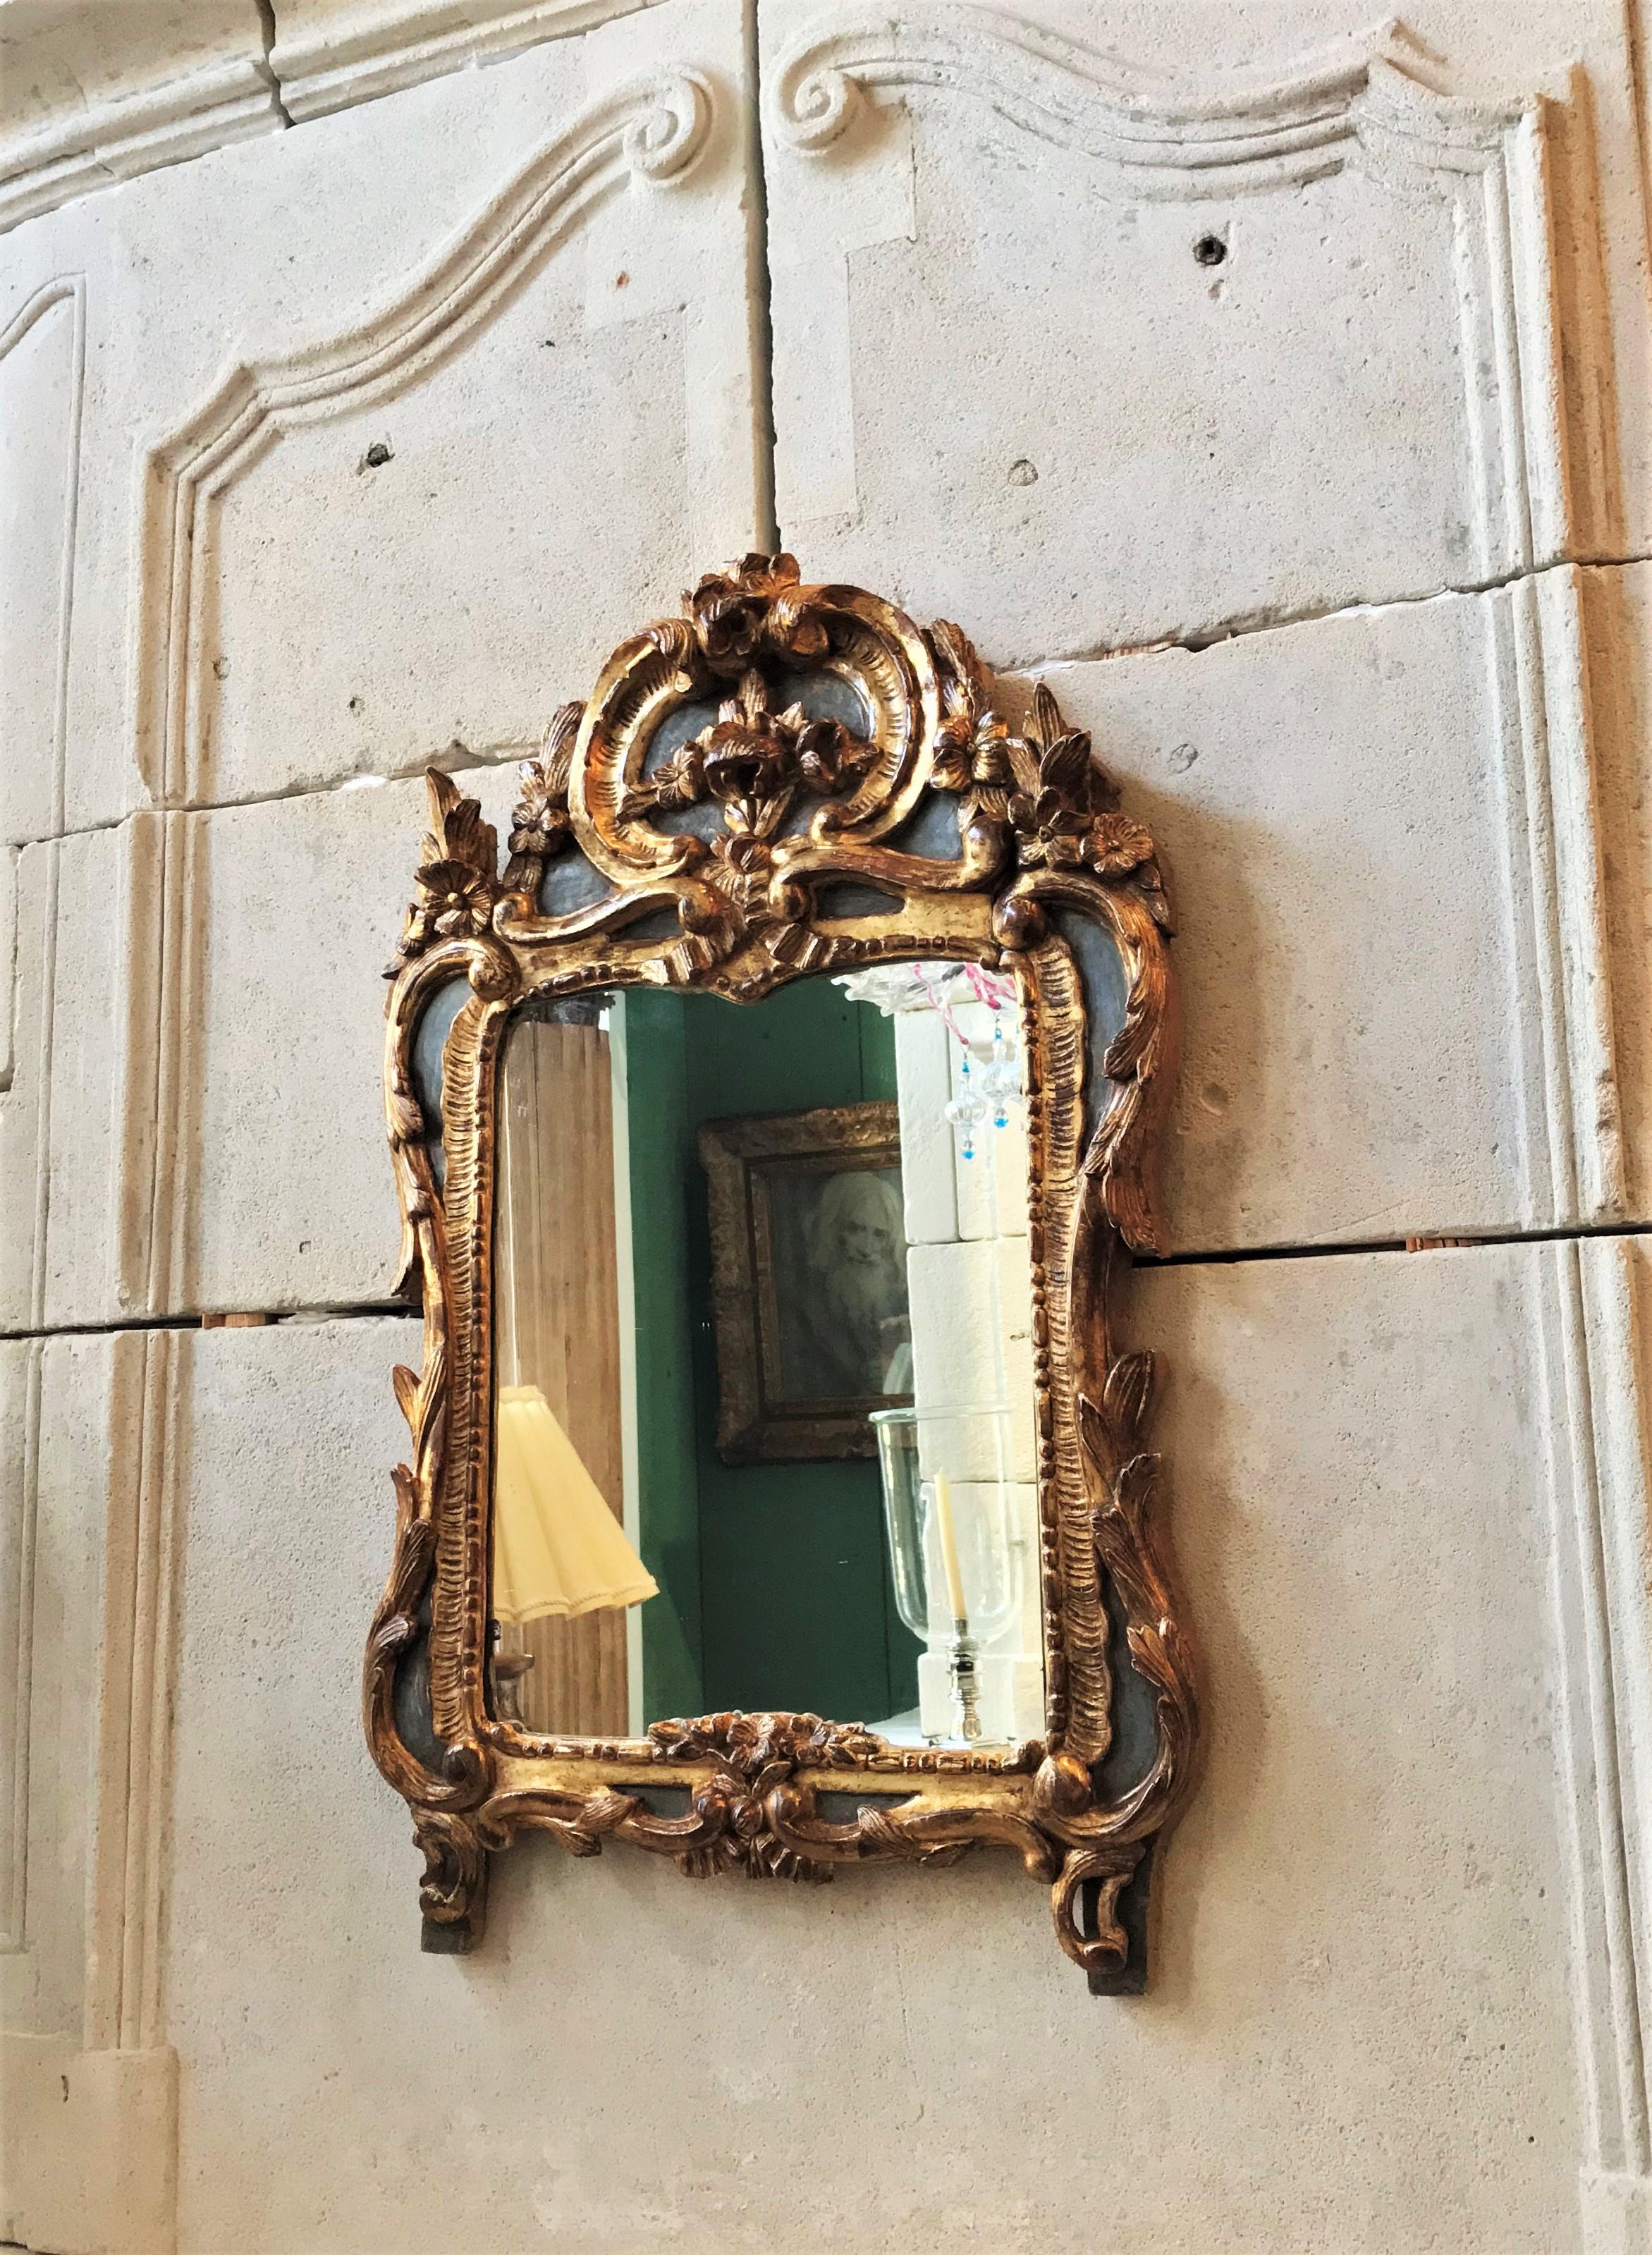 A superb Hand carved and gilded wood 18th century period Louis XV / French Regency  Regence rectangular framed antique mirror with it’s original carved decorative top sides and bottom, circa 1750, France. It's like a piece of Sculpture / Art to